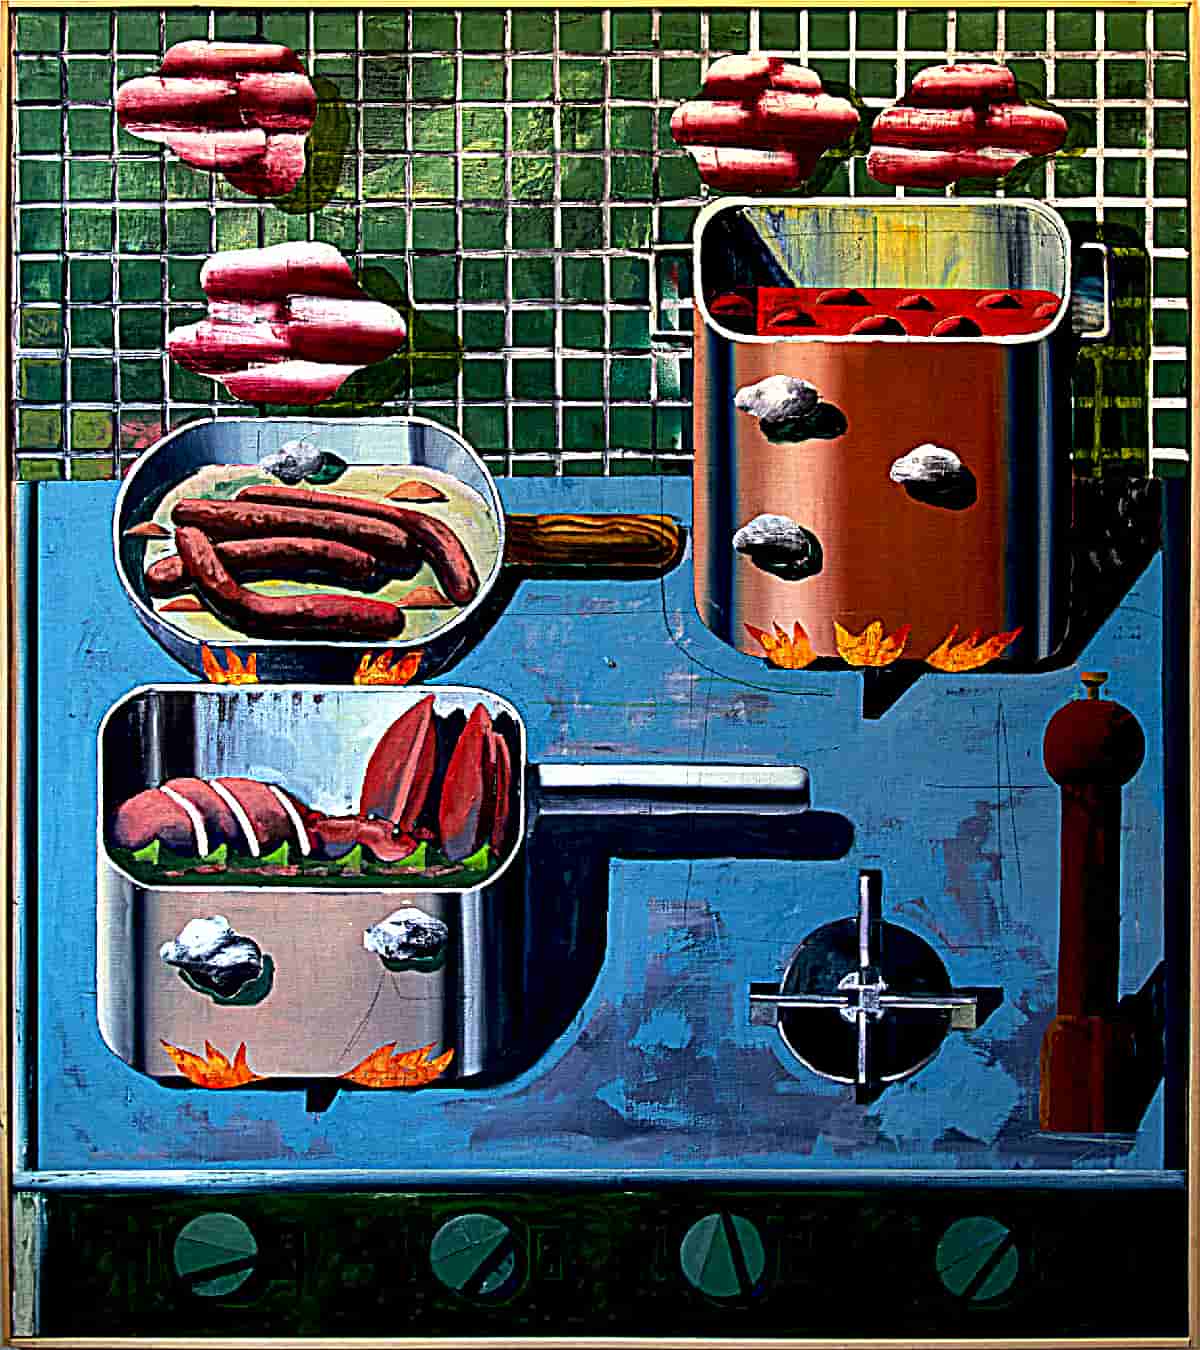 Vivid Oil Paintings by Kristof Santy Present Humble Meals as Bold Gastronomic Decadence; Unit London Showcases Vivid Paintings by Belgian artist Kristof Santy